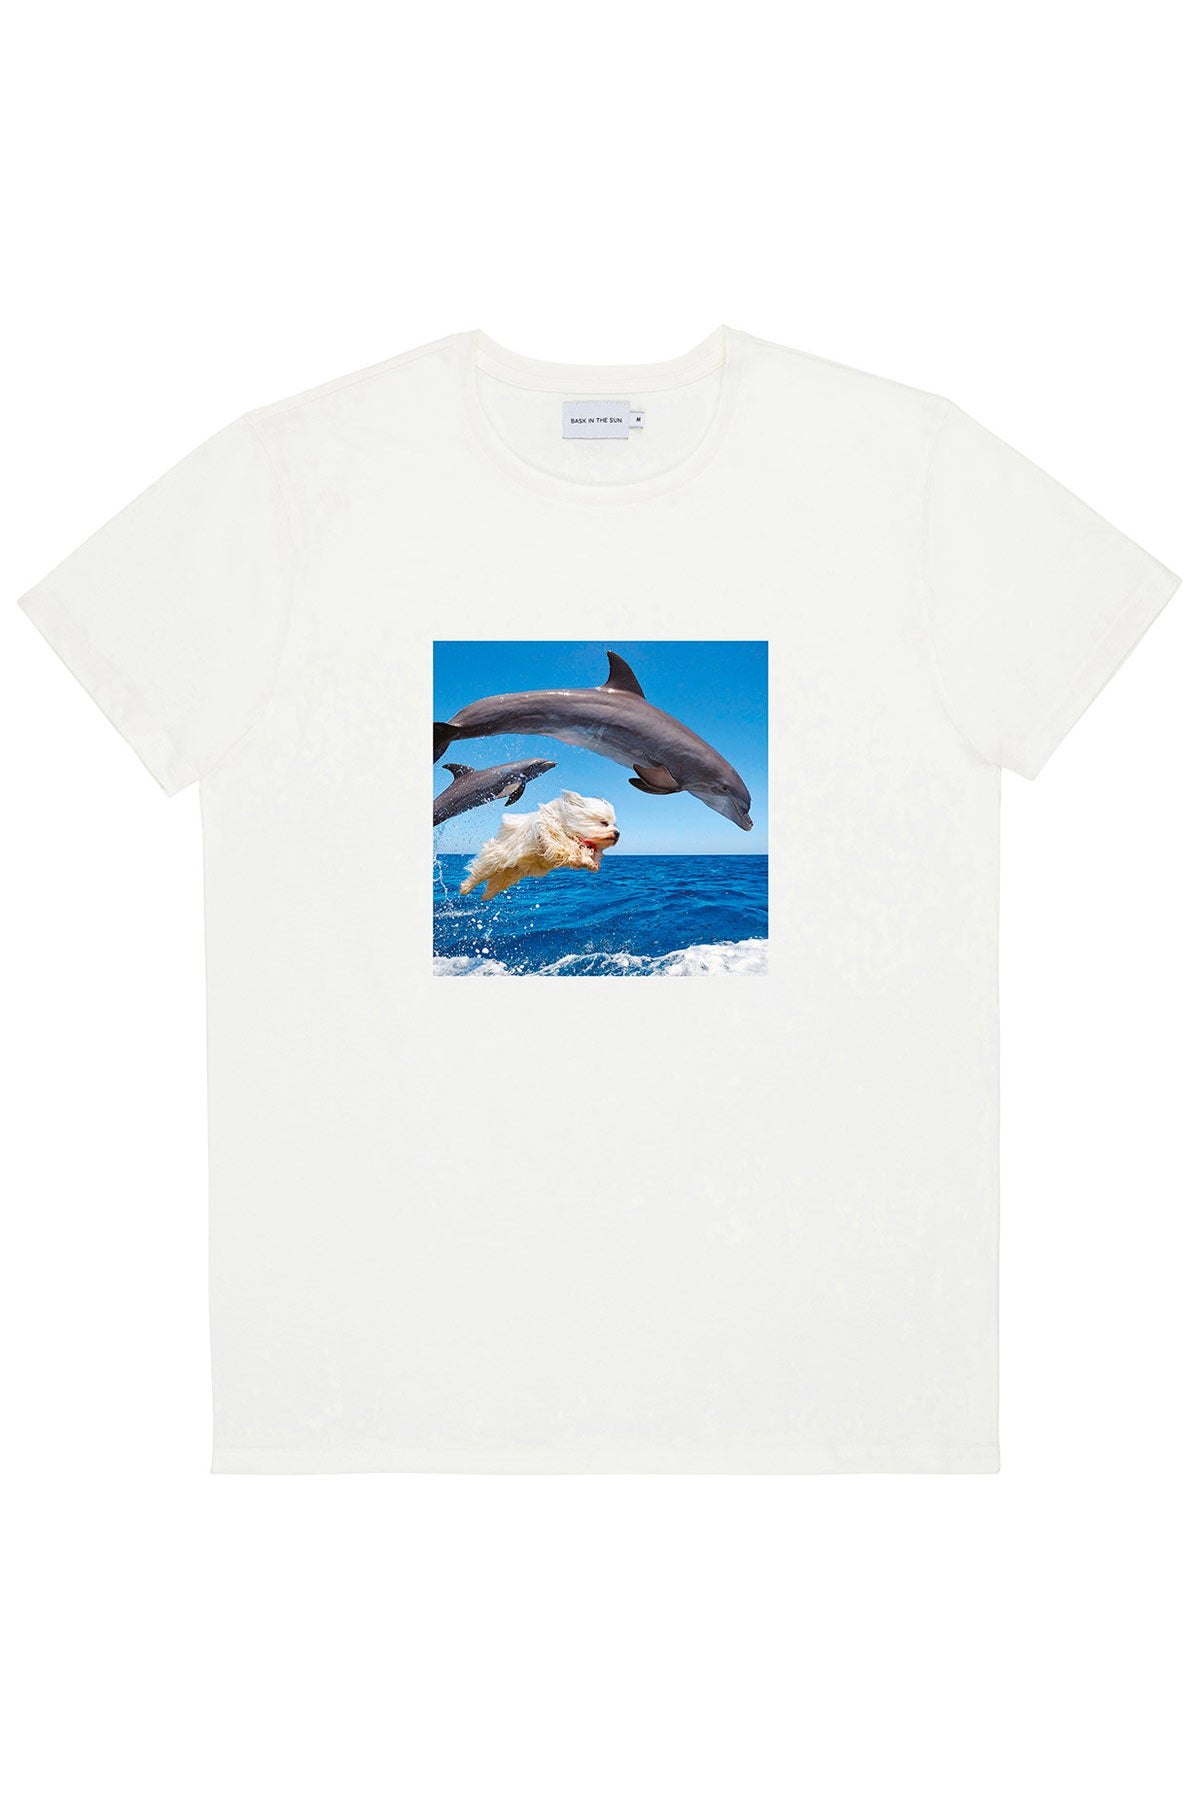 T-Shirt Dolphins - Bask in the sun